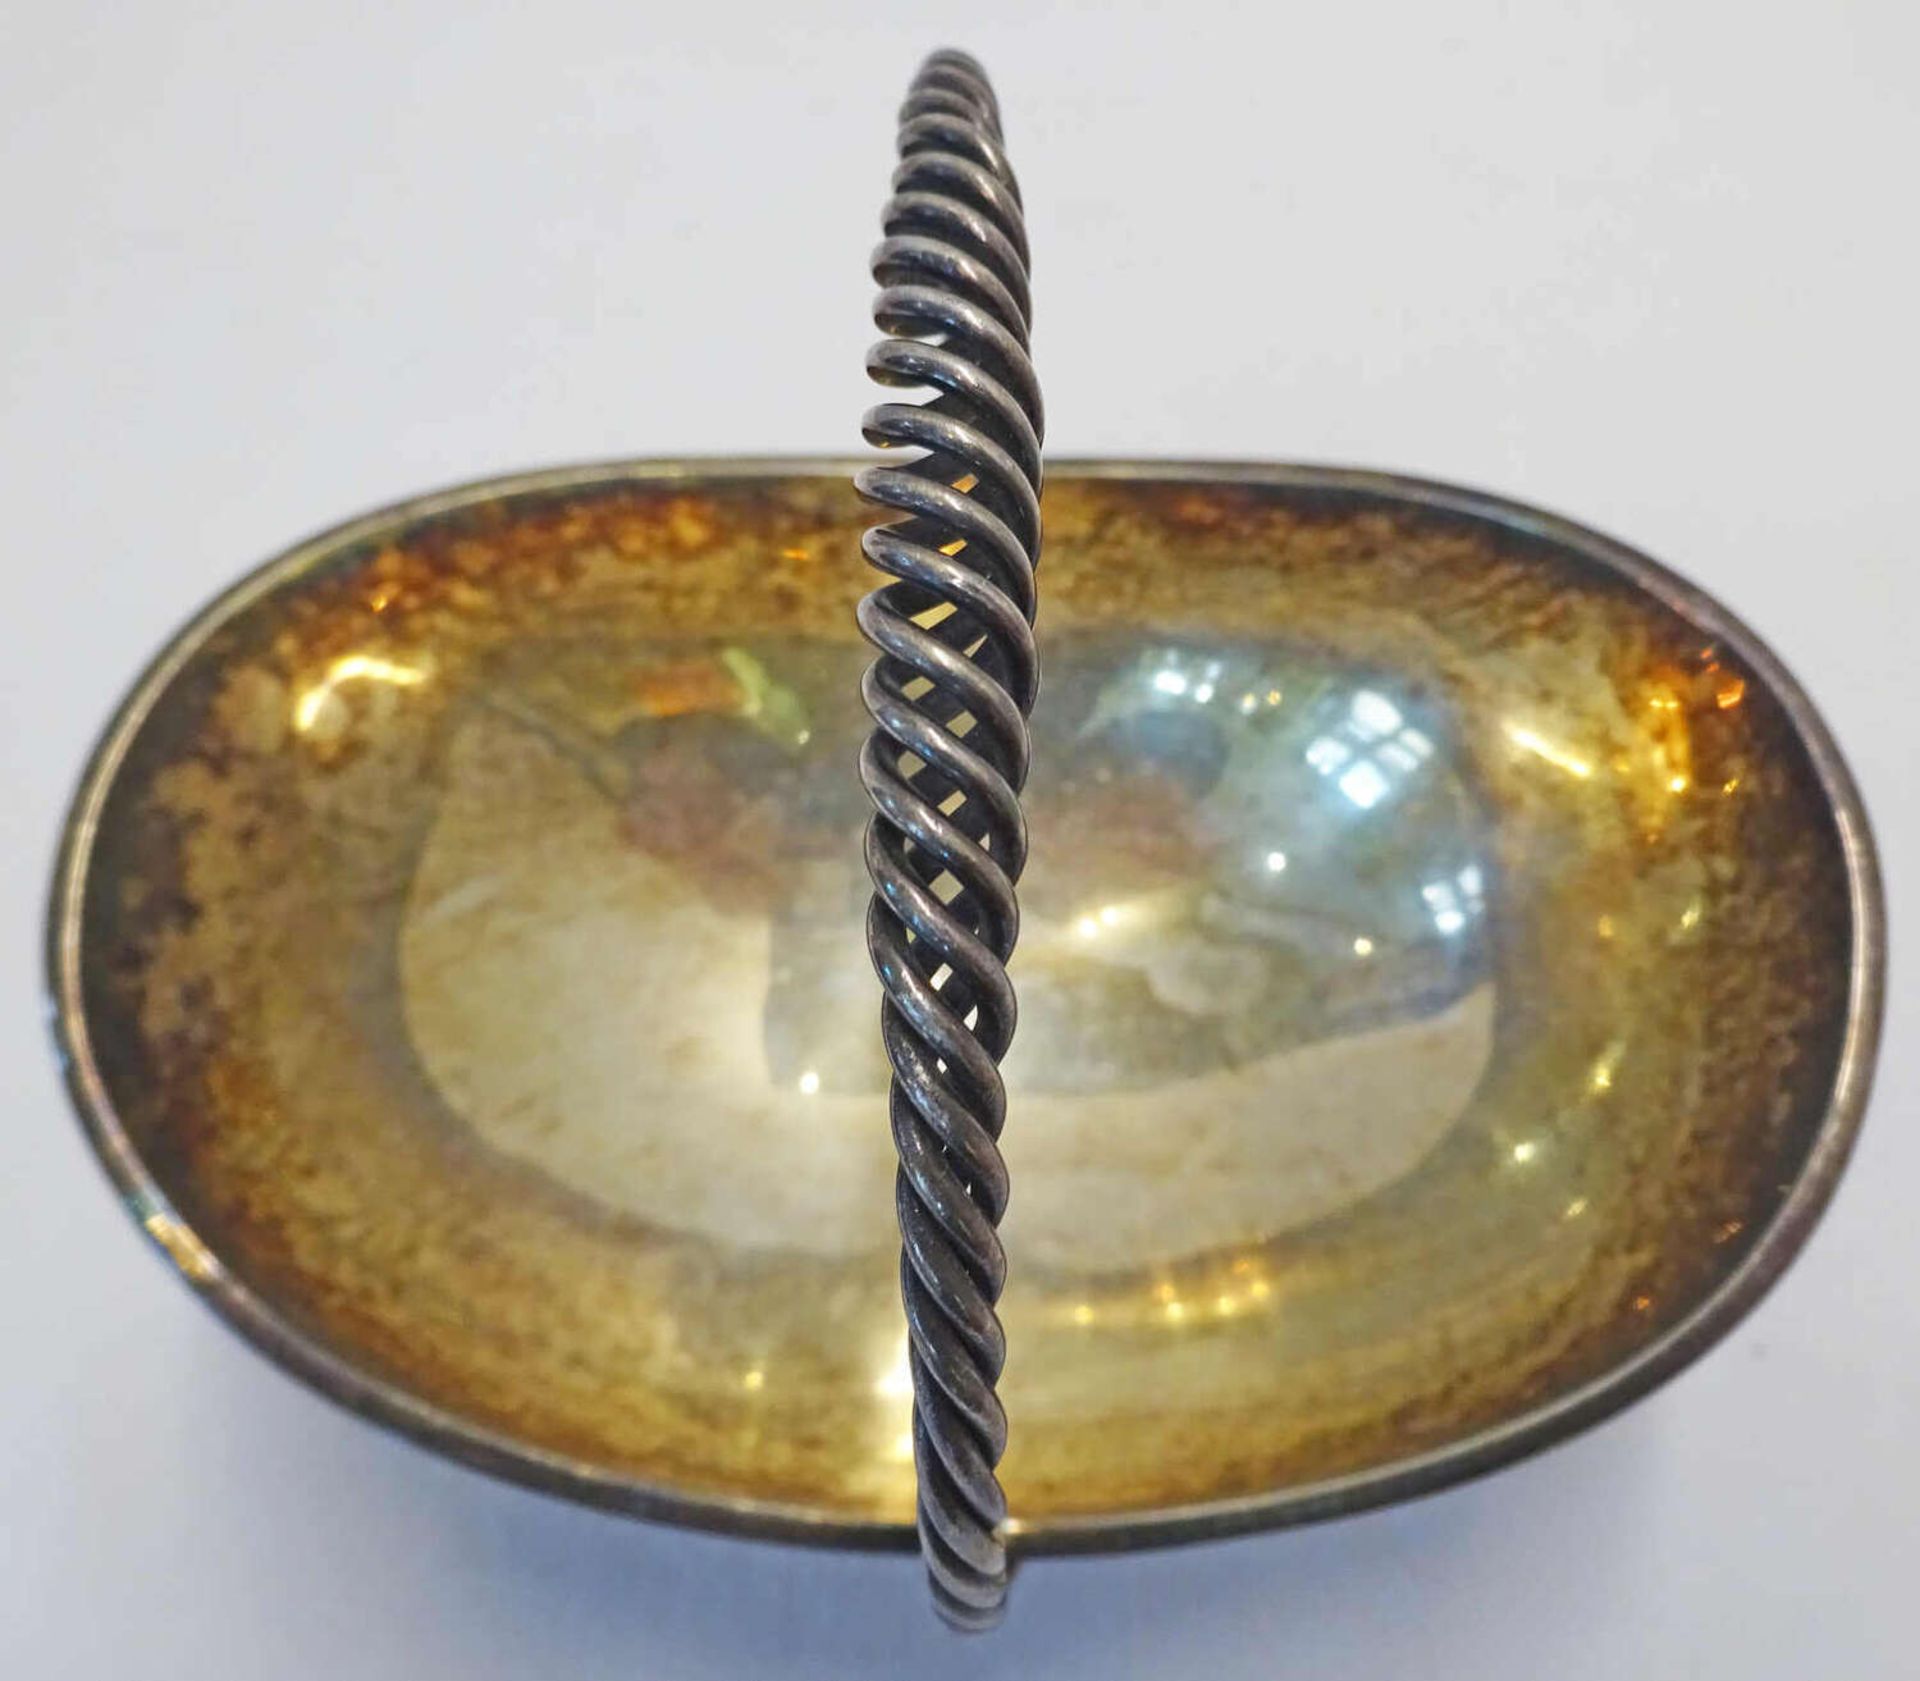 Silber Henkelschale mit Sterling Punze, guter Zustand. Höhe ca. 10 cmSilver handle bowl with sterl - Image 2 of 3